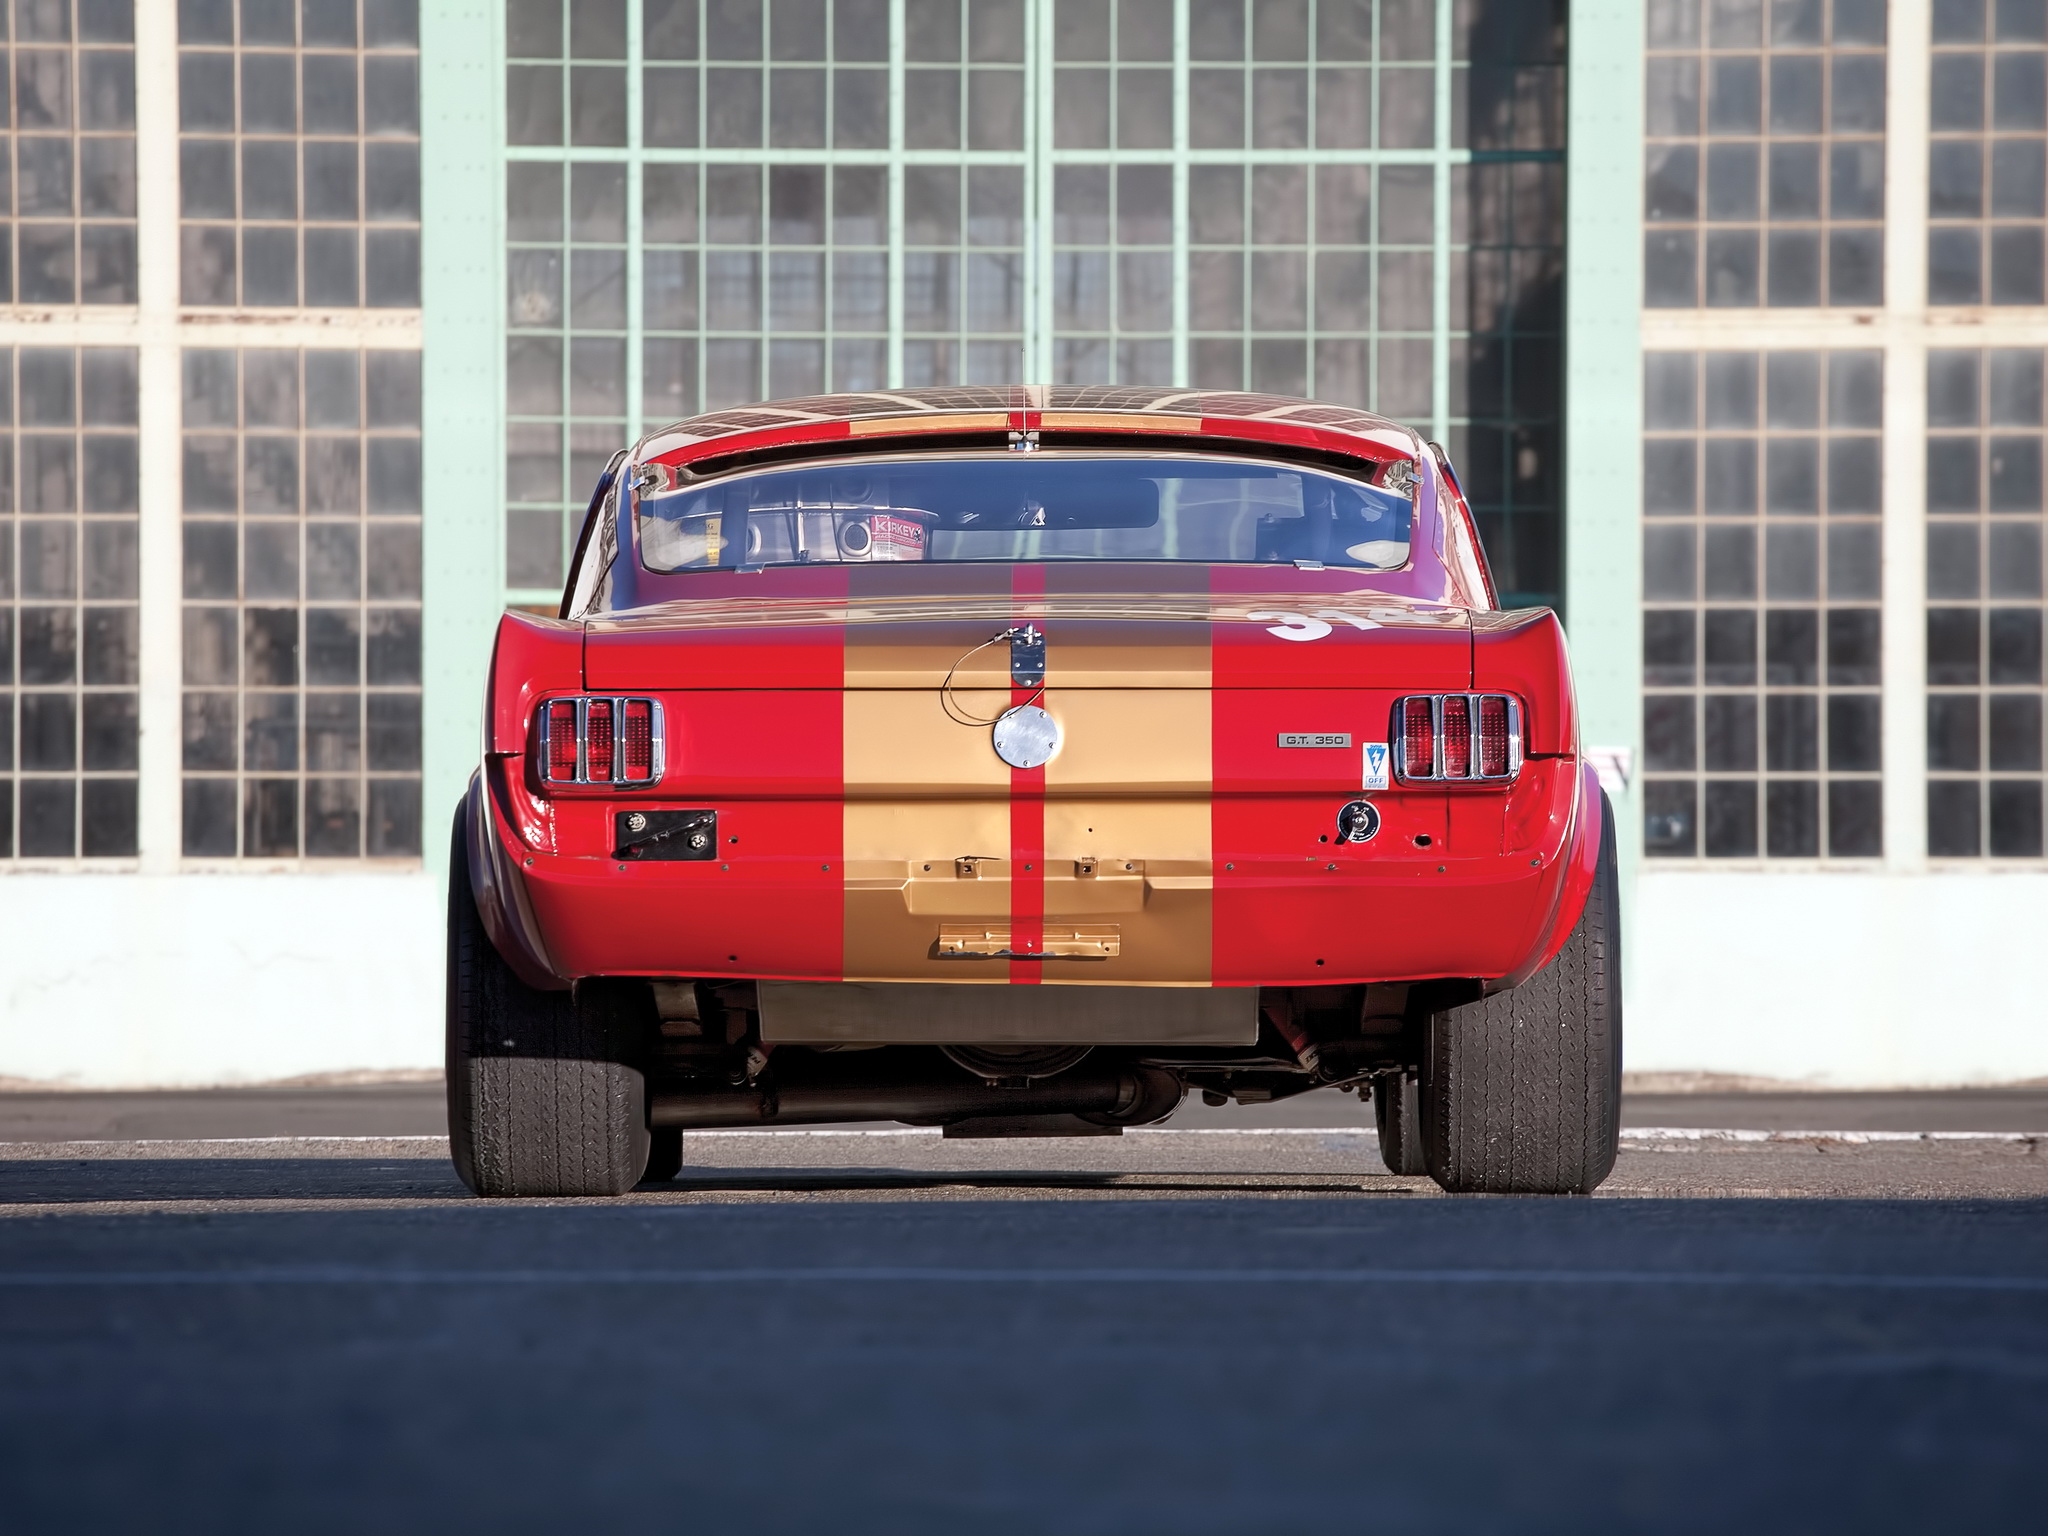 1966, Shelby, Gt350h, Scca, B production, Ford, Mustang, Race, Racing, Hot, Rod, Rods, Muscle Wallpaper